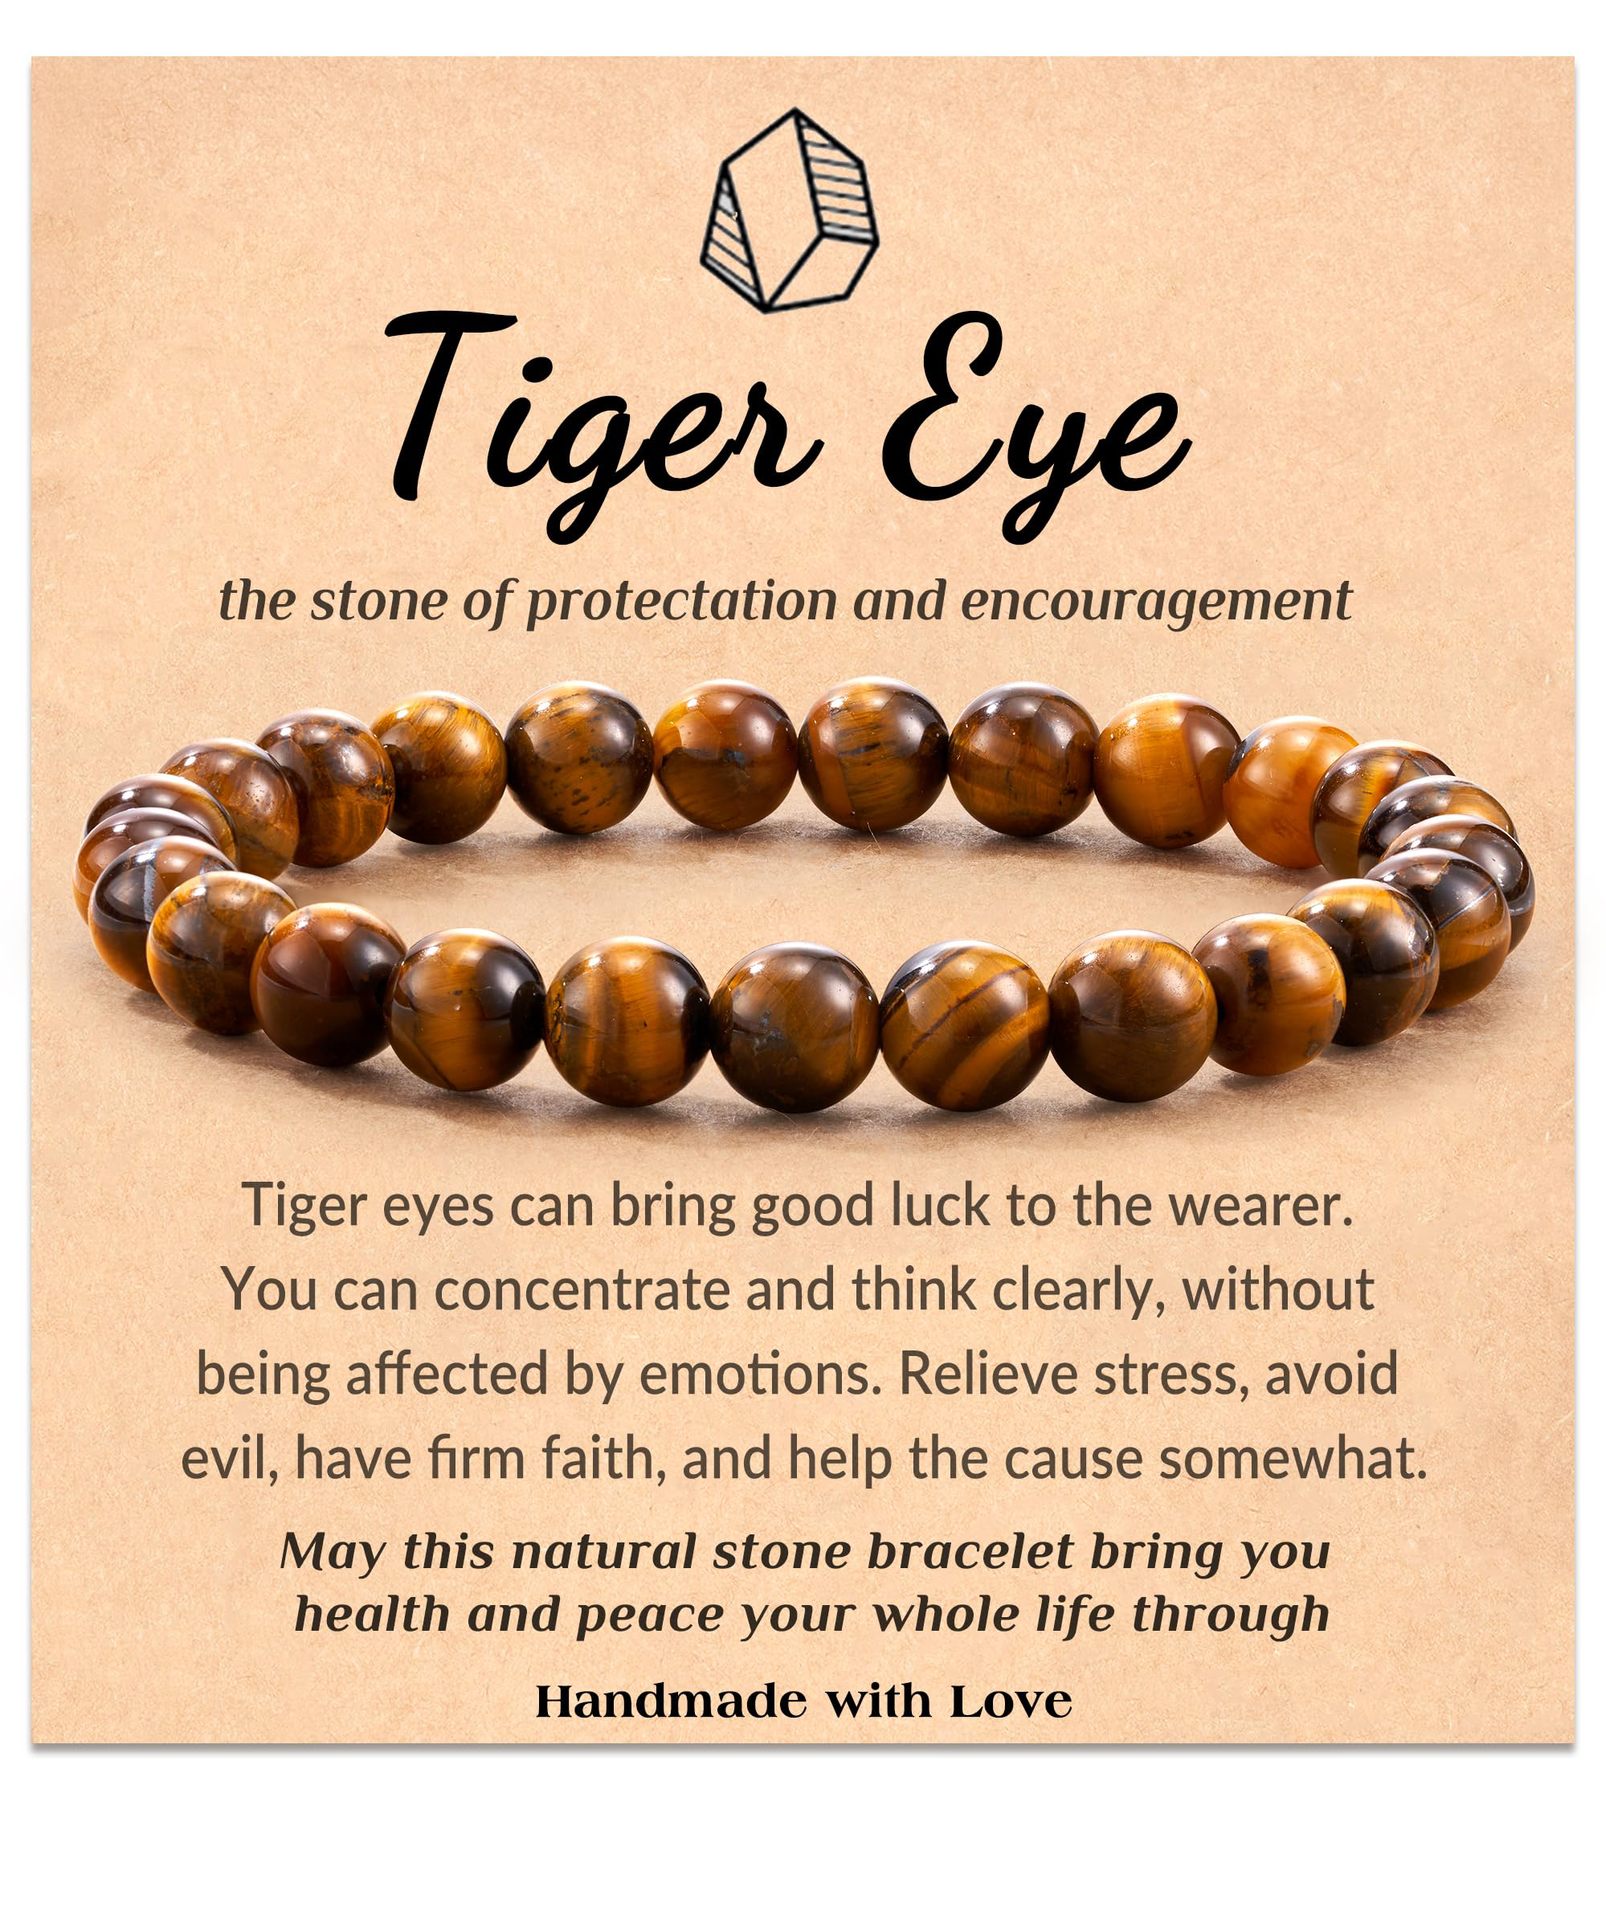 Tigers Eye Crystal Meaning Tiger's Eye Benefits & Uses